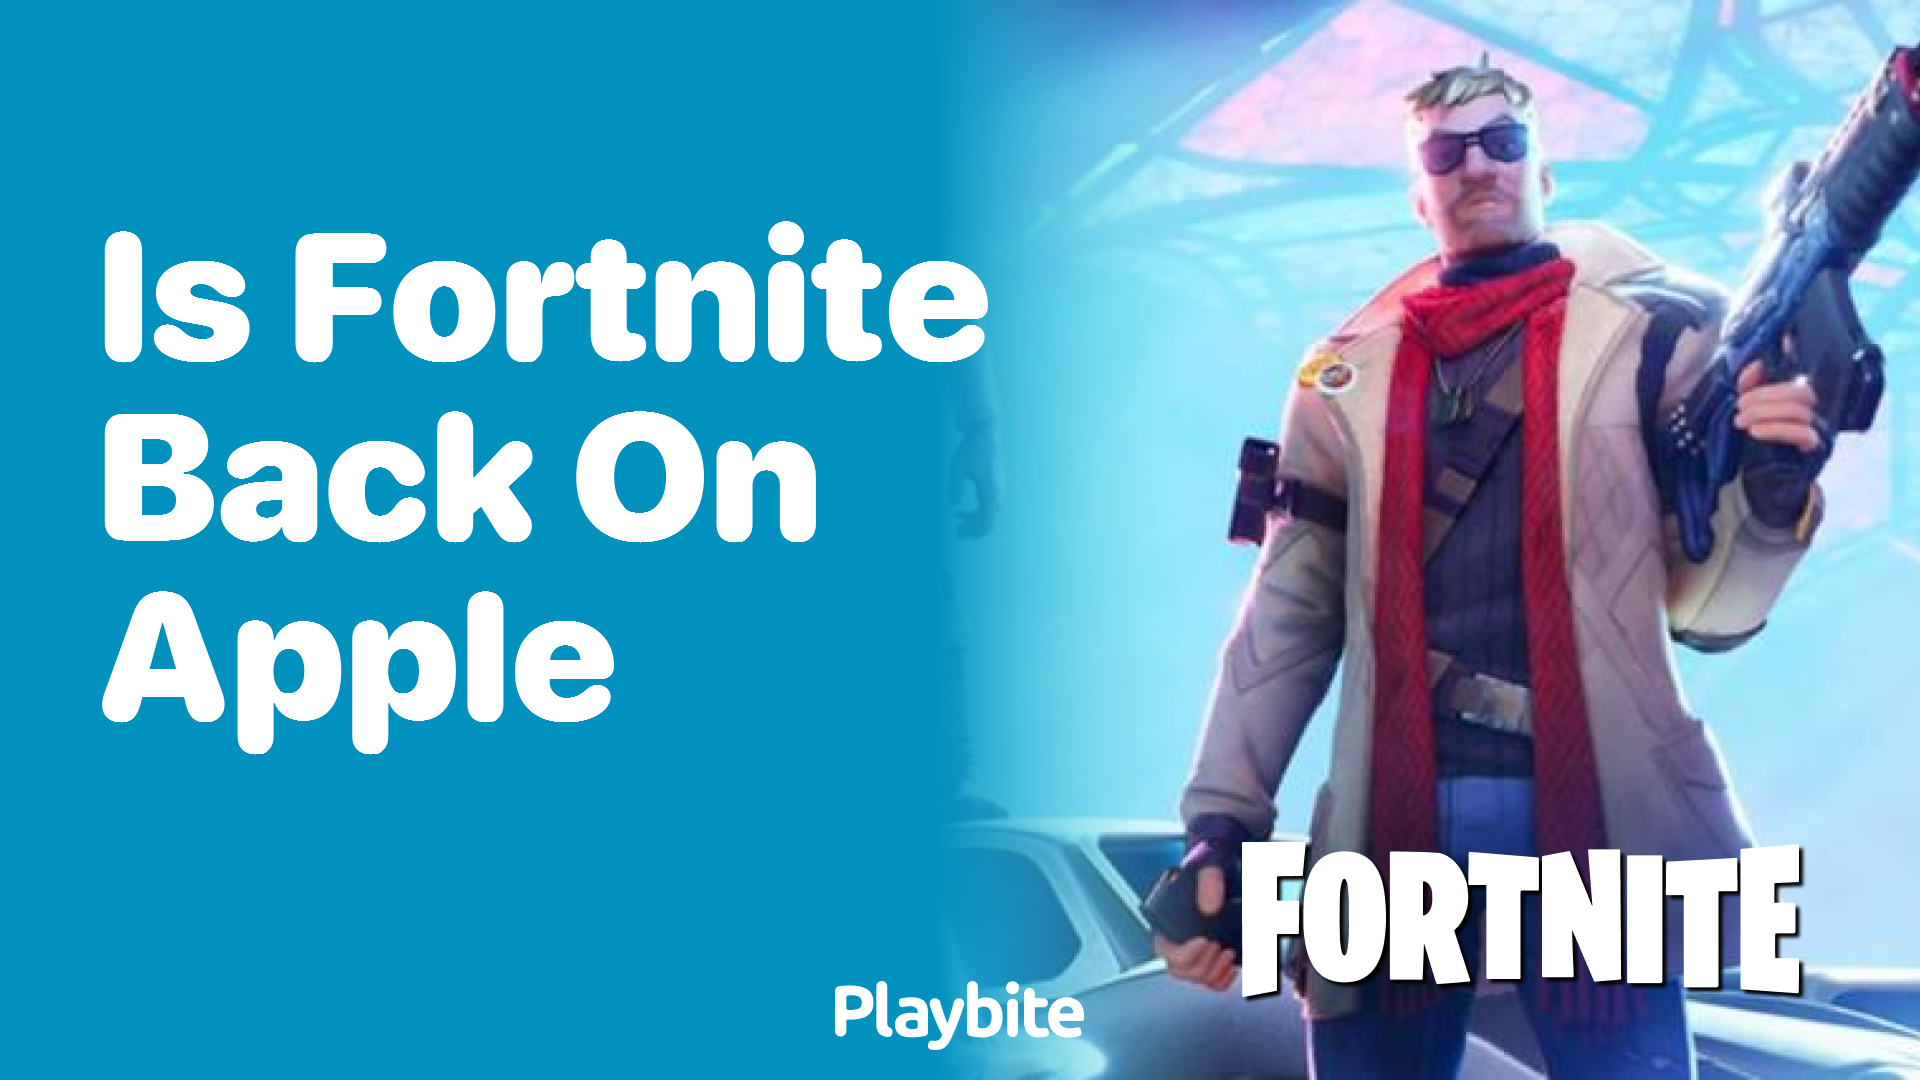 Is Fortnite Back on Apple Devices?